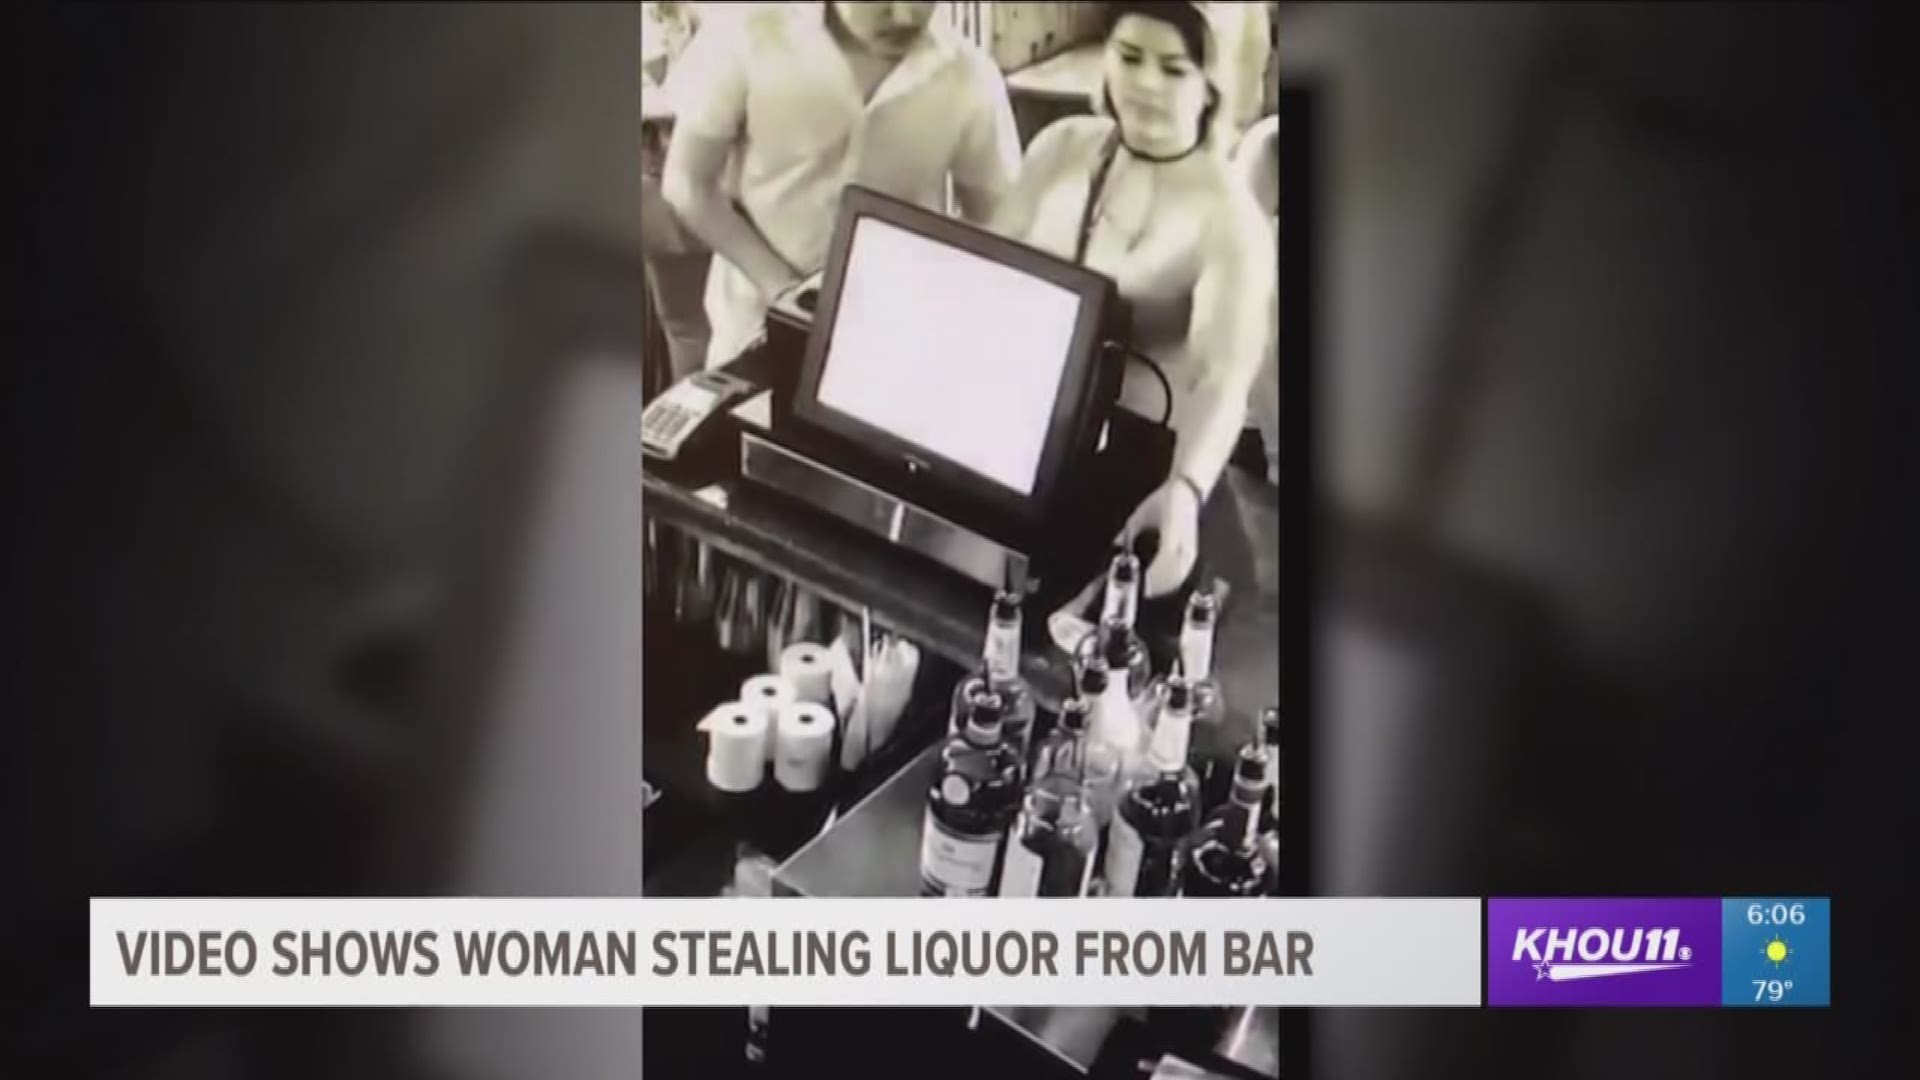 A woman was caught on camera stealing a bottle of Buchanan's Whisky from Live Sports Bar & Grill in Downtown Houston.